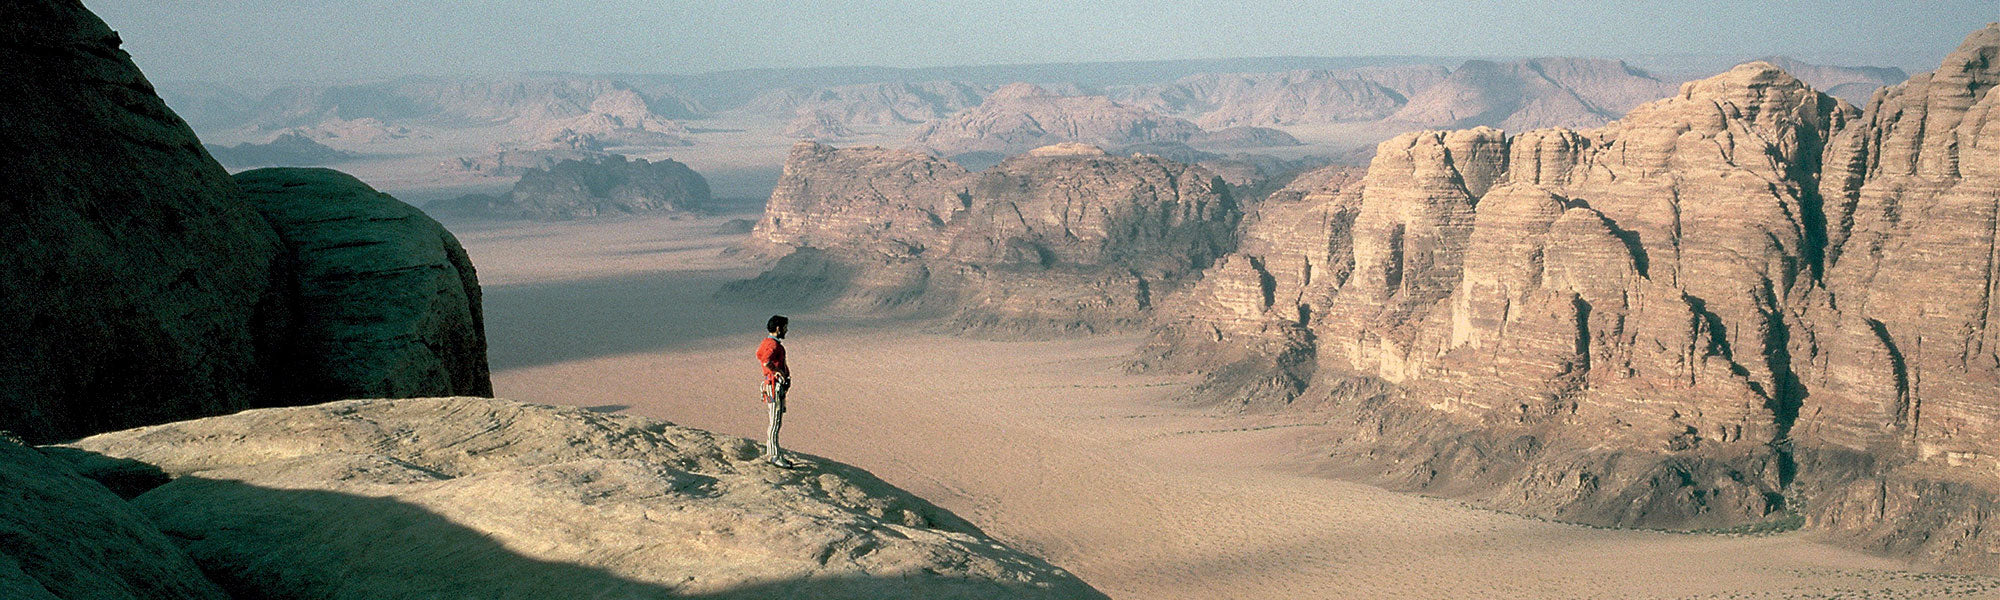 Wadi Rum photo taken from Quest into the Unknown by Tony Howard